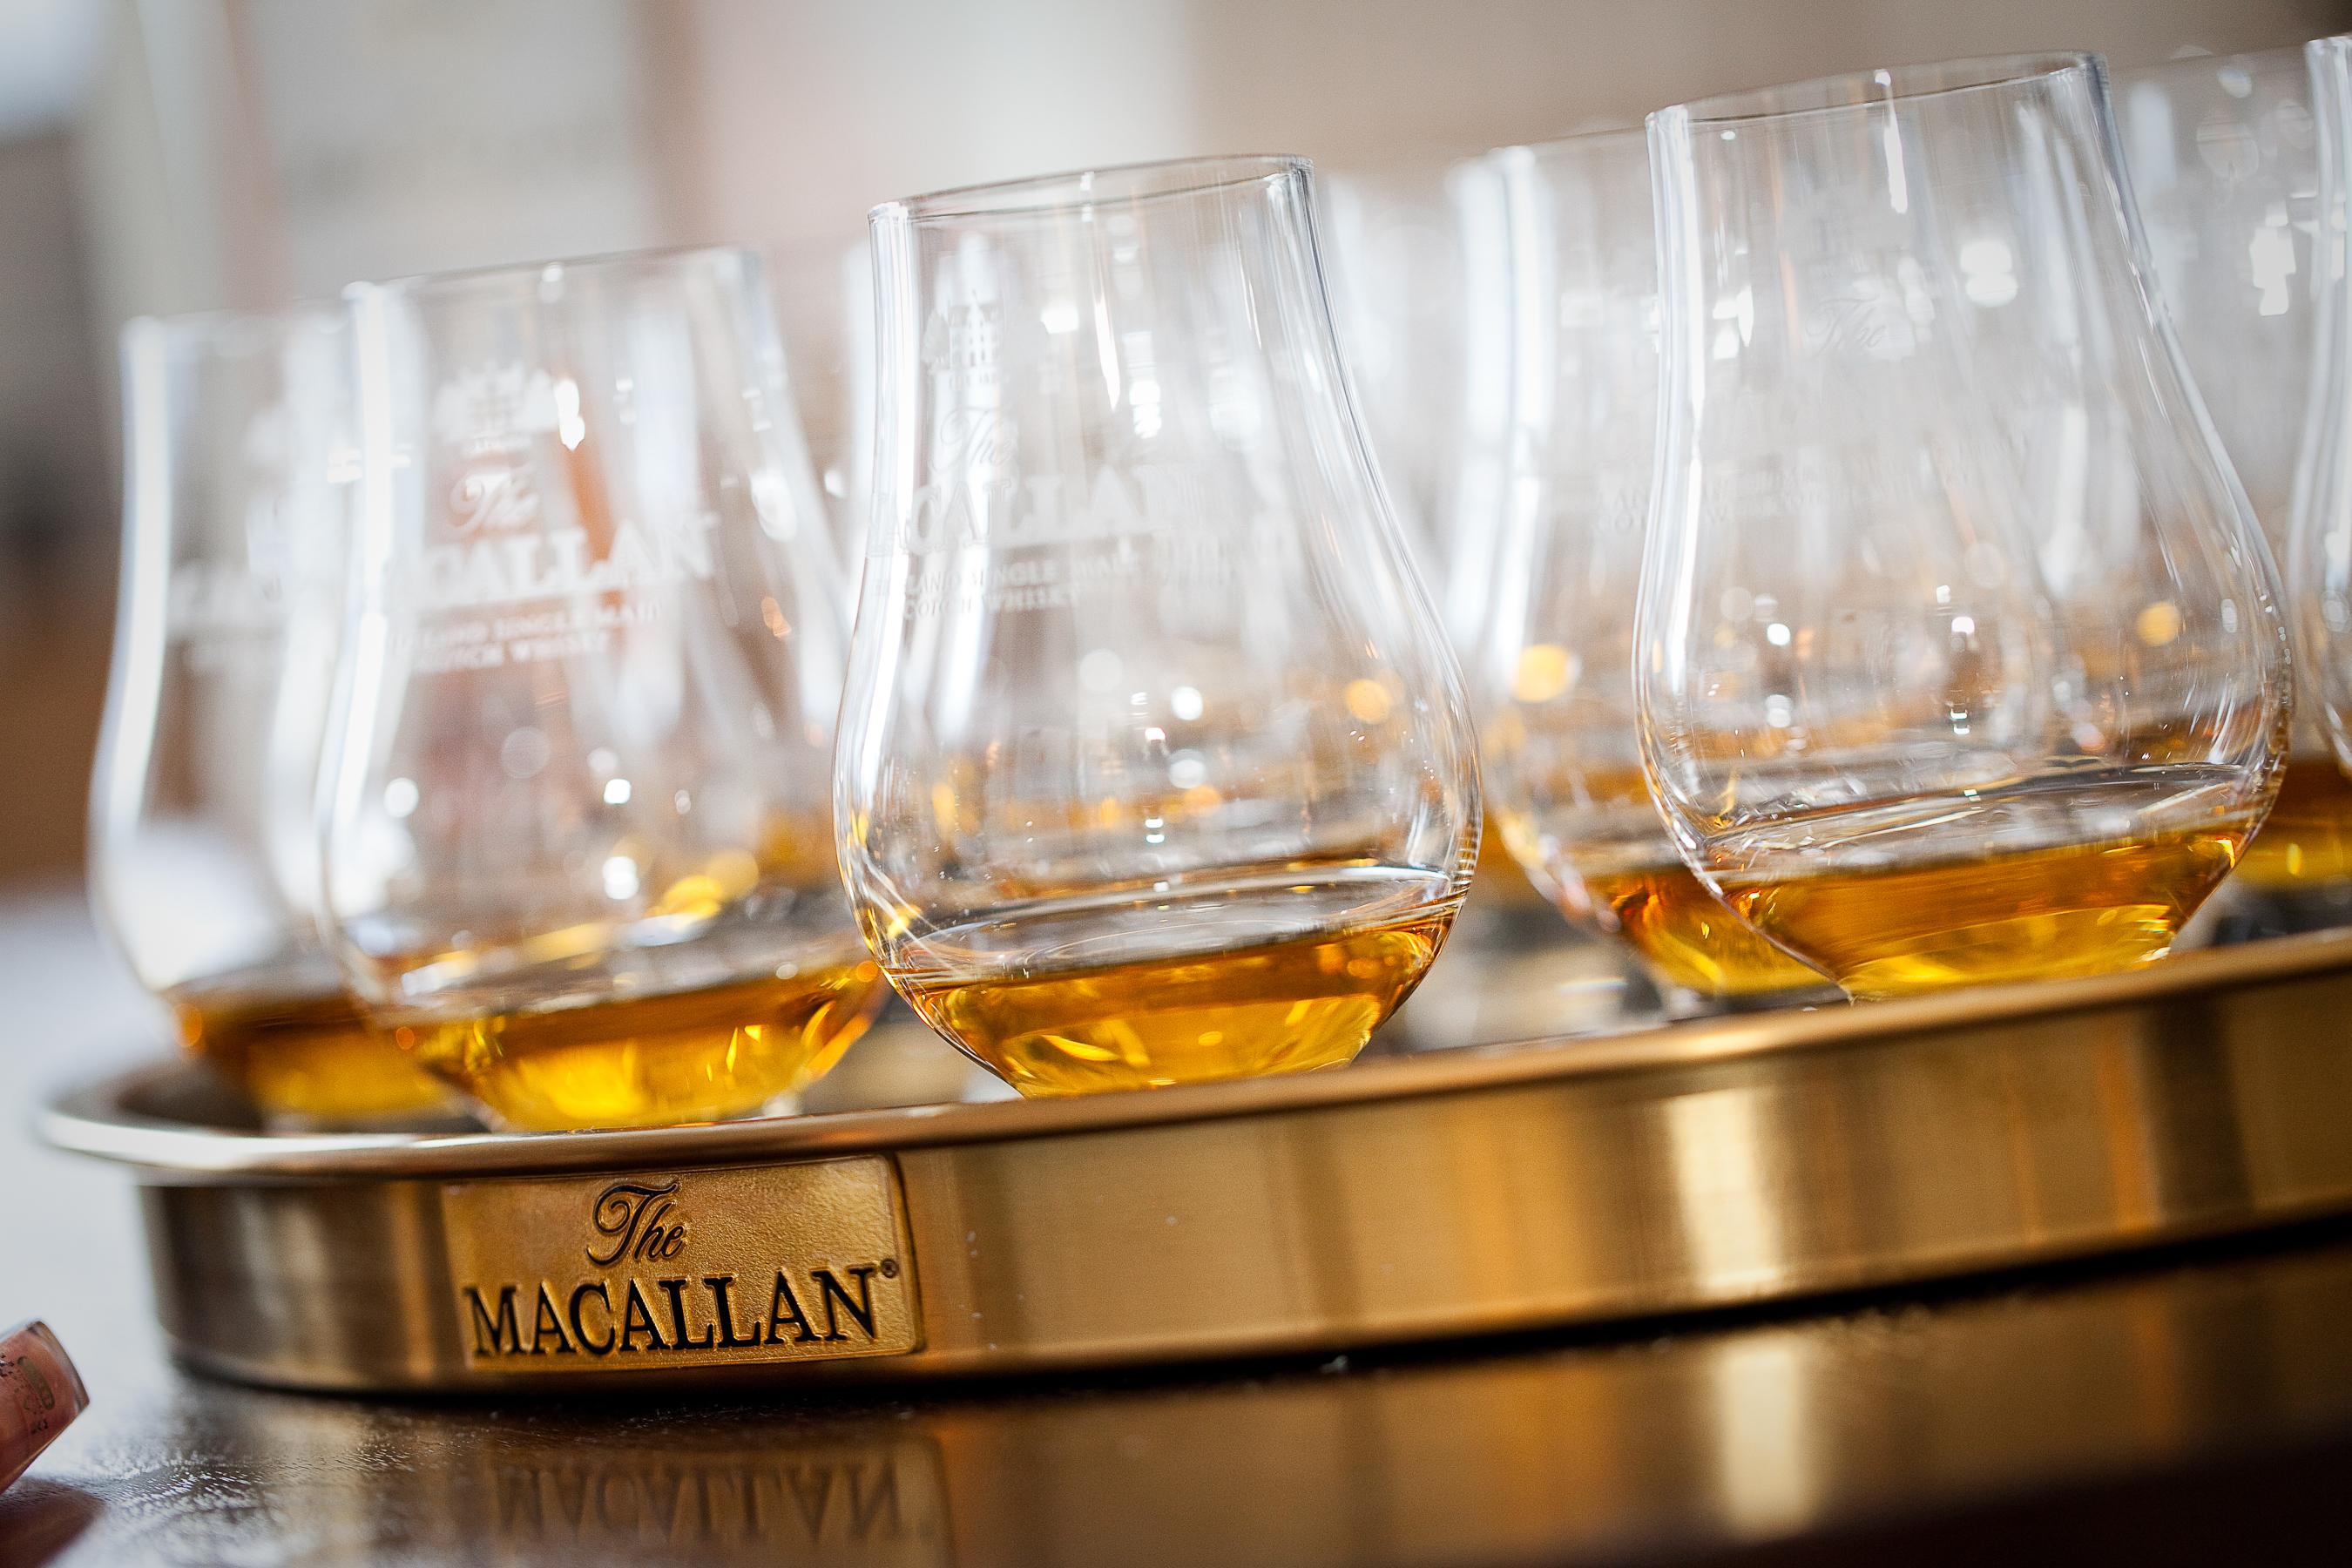 The Macallan releases four exclusive whiskies under its Quest Collection